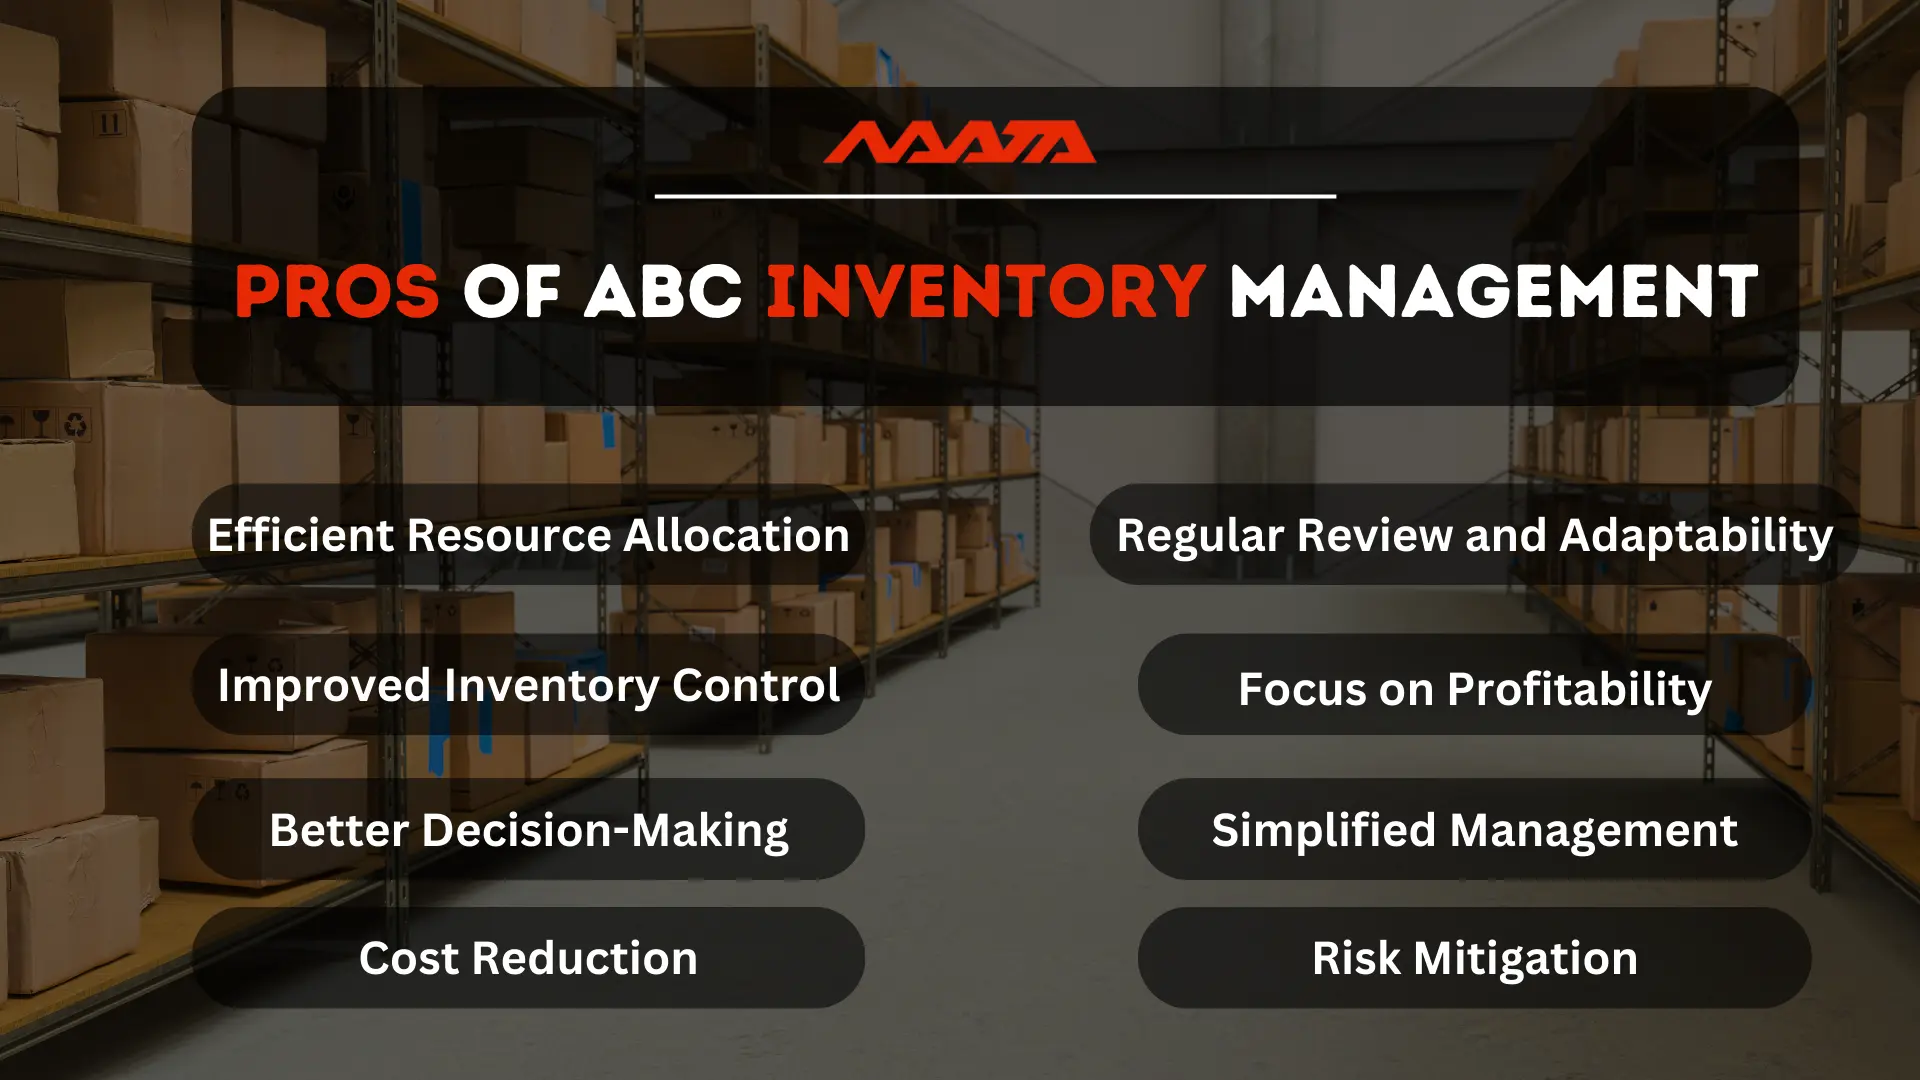 Pros OF ABC Inventory Management